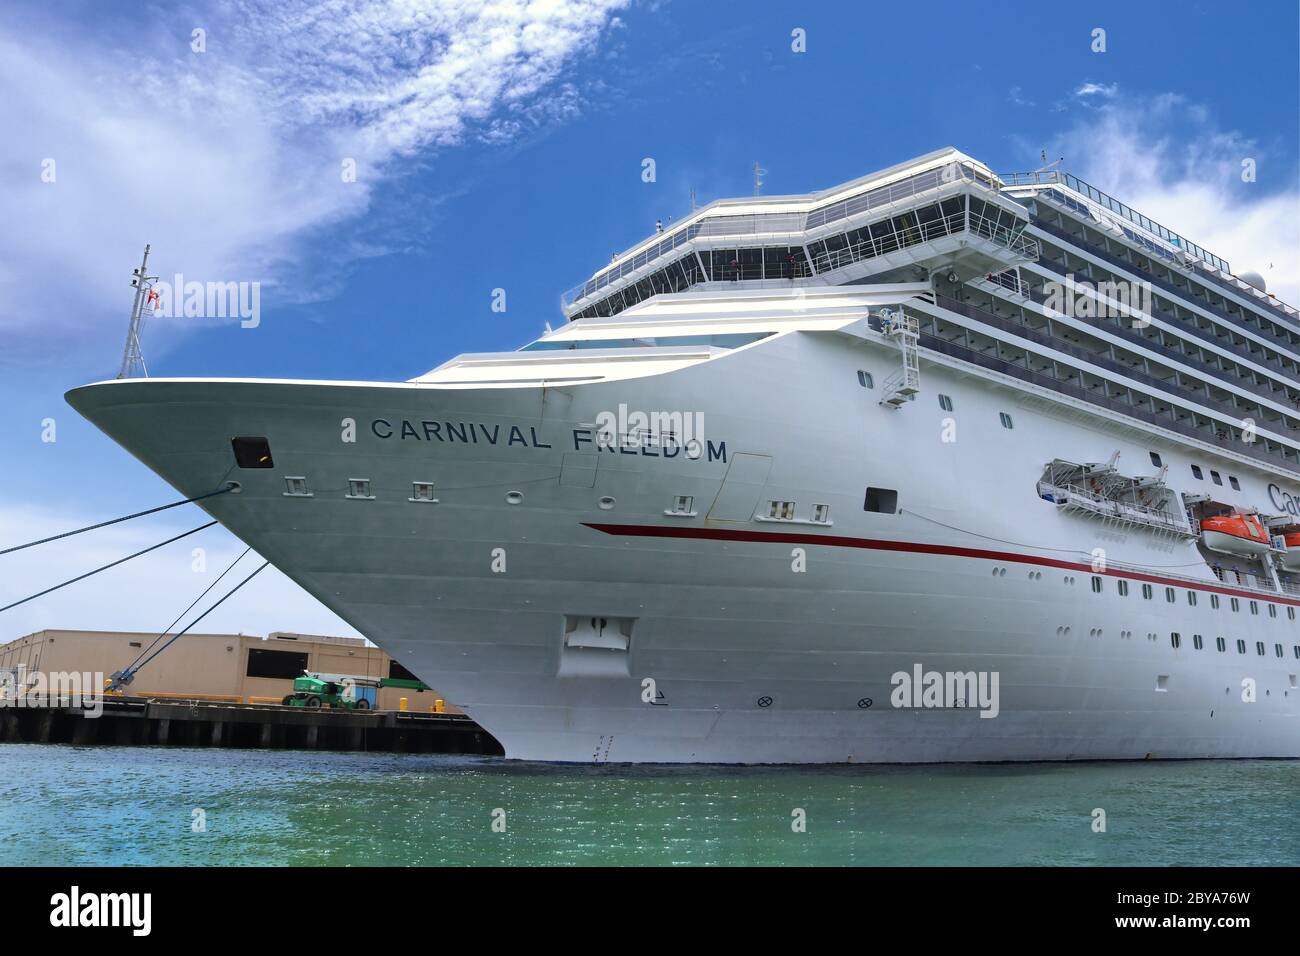 Carnival Freedom cruise ship in Port of Galveston, Texas, USA. Carnival Freedom is a Conquest-class cruise ship, operated by Carnival Cruise Line. Stock Photo